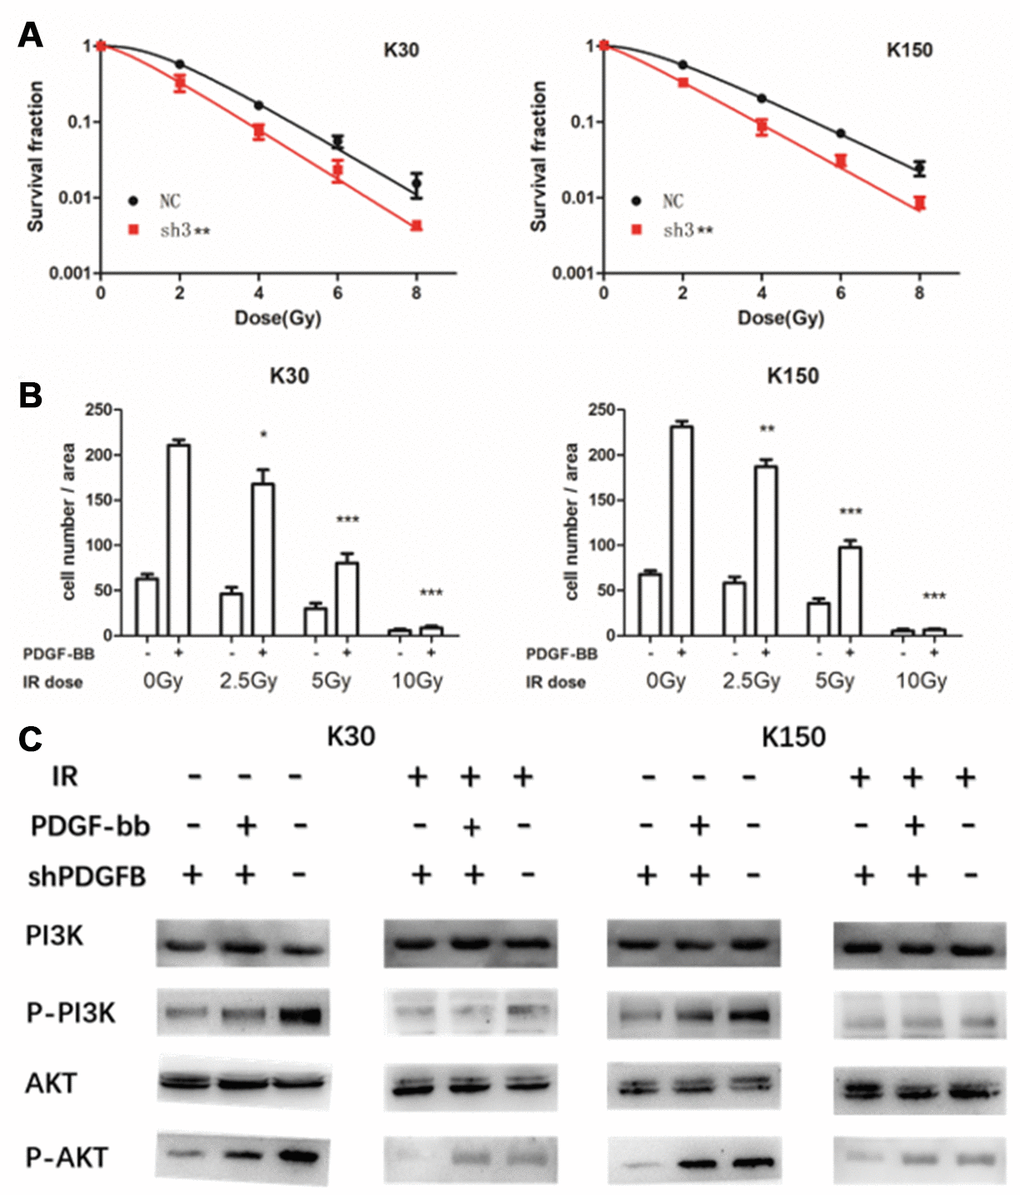 Inhibition of PDGFB enhanced the sensitivity of esophageal squamous cell carcinoma cells to ionizing radiation (IR), a treatment modality that suppressed PDGF-BB-induced migration, and did so by blocking the PI3K/AKT pathway. PDGFB-knockdown in cancer cells showed lower colony formation capacity than control cells after IR (A). In addition, results of the transwell assay suggested that PDGF-BB can promote KYSE30 and KYSE150 cell migration while IR can suppress it (B). Western blot analysis showed that the PI3K/AKT pathway was activated by PDGF-BB, and pretreatment with IR suppressed PDGF-BB-induced phosphorylation of PI3K and AKT in both cell-lines (C). *P 